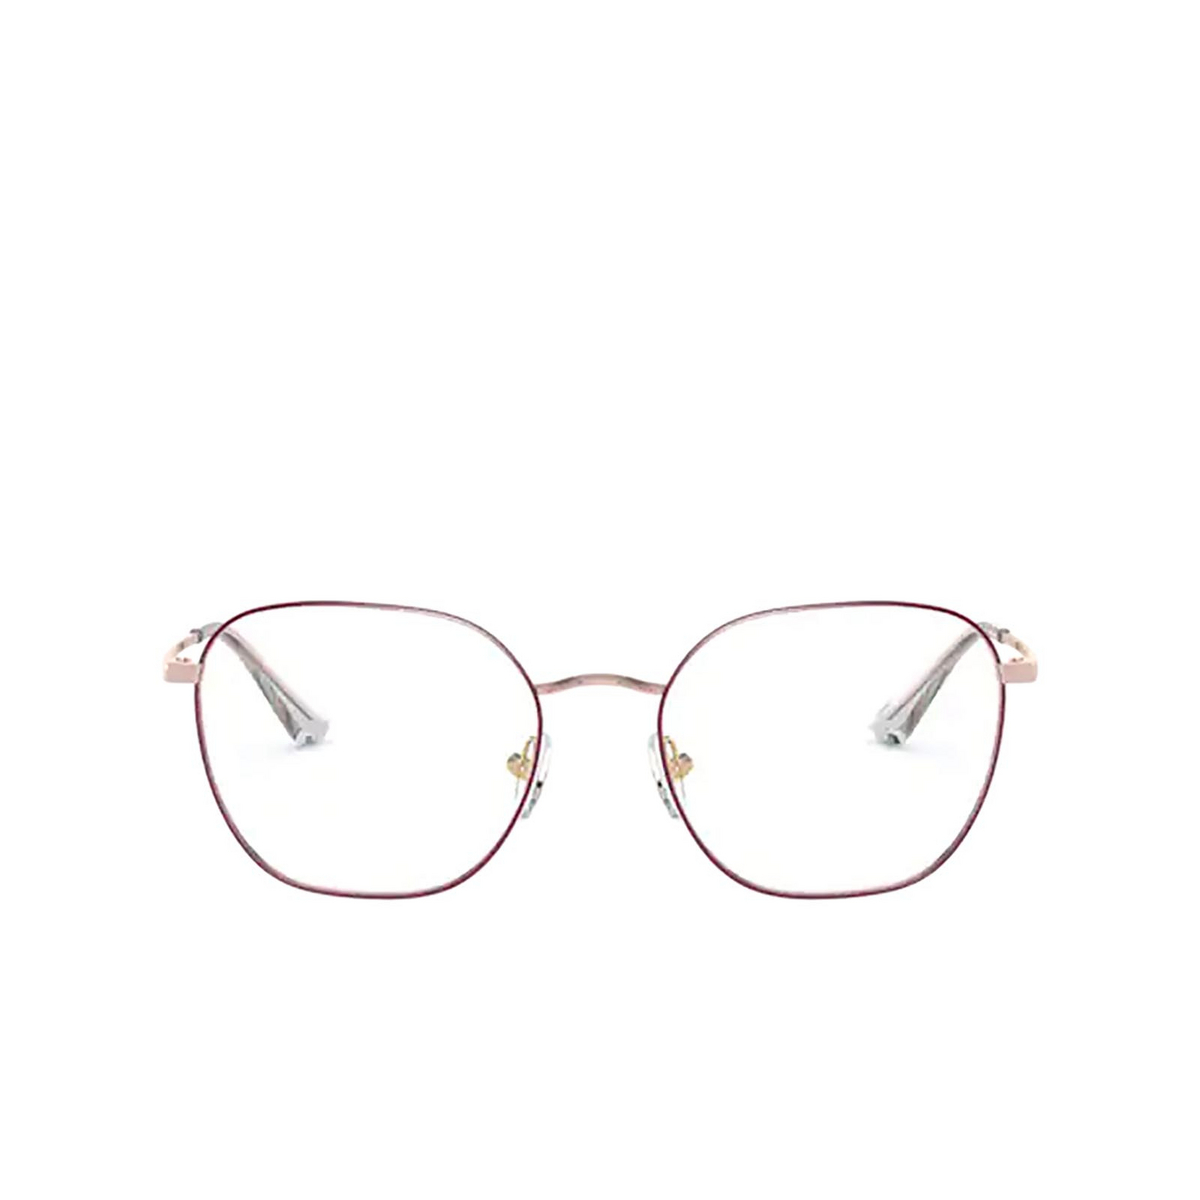 Vogue VO4178 Eyeglasses 5089 TOP PURPLE / ROSE GOLD - front view